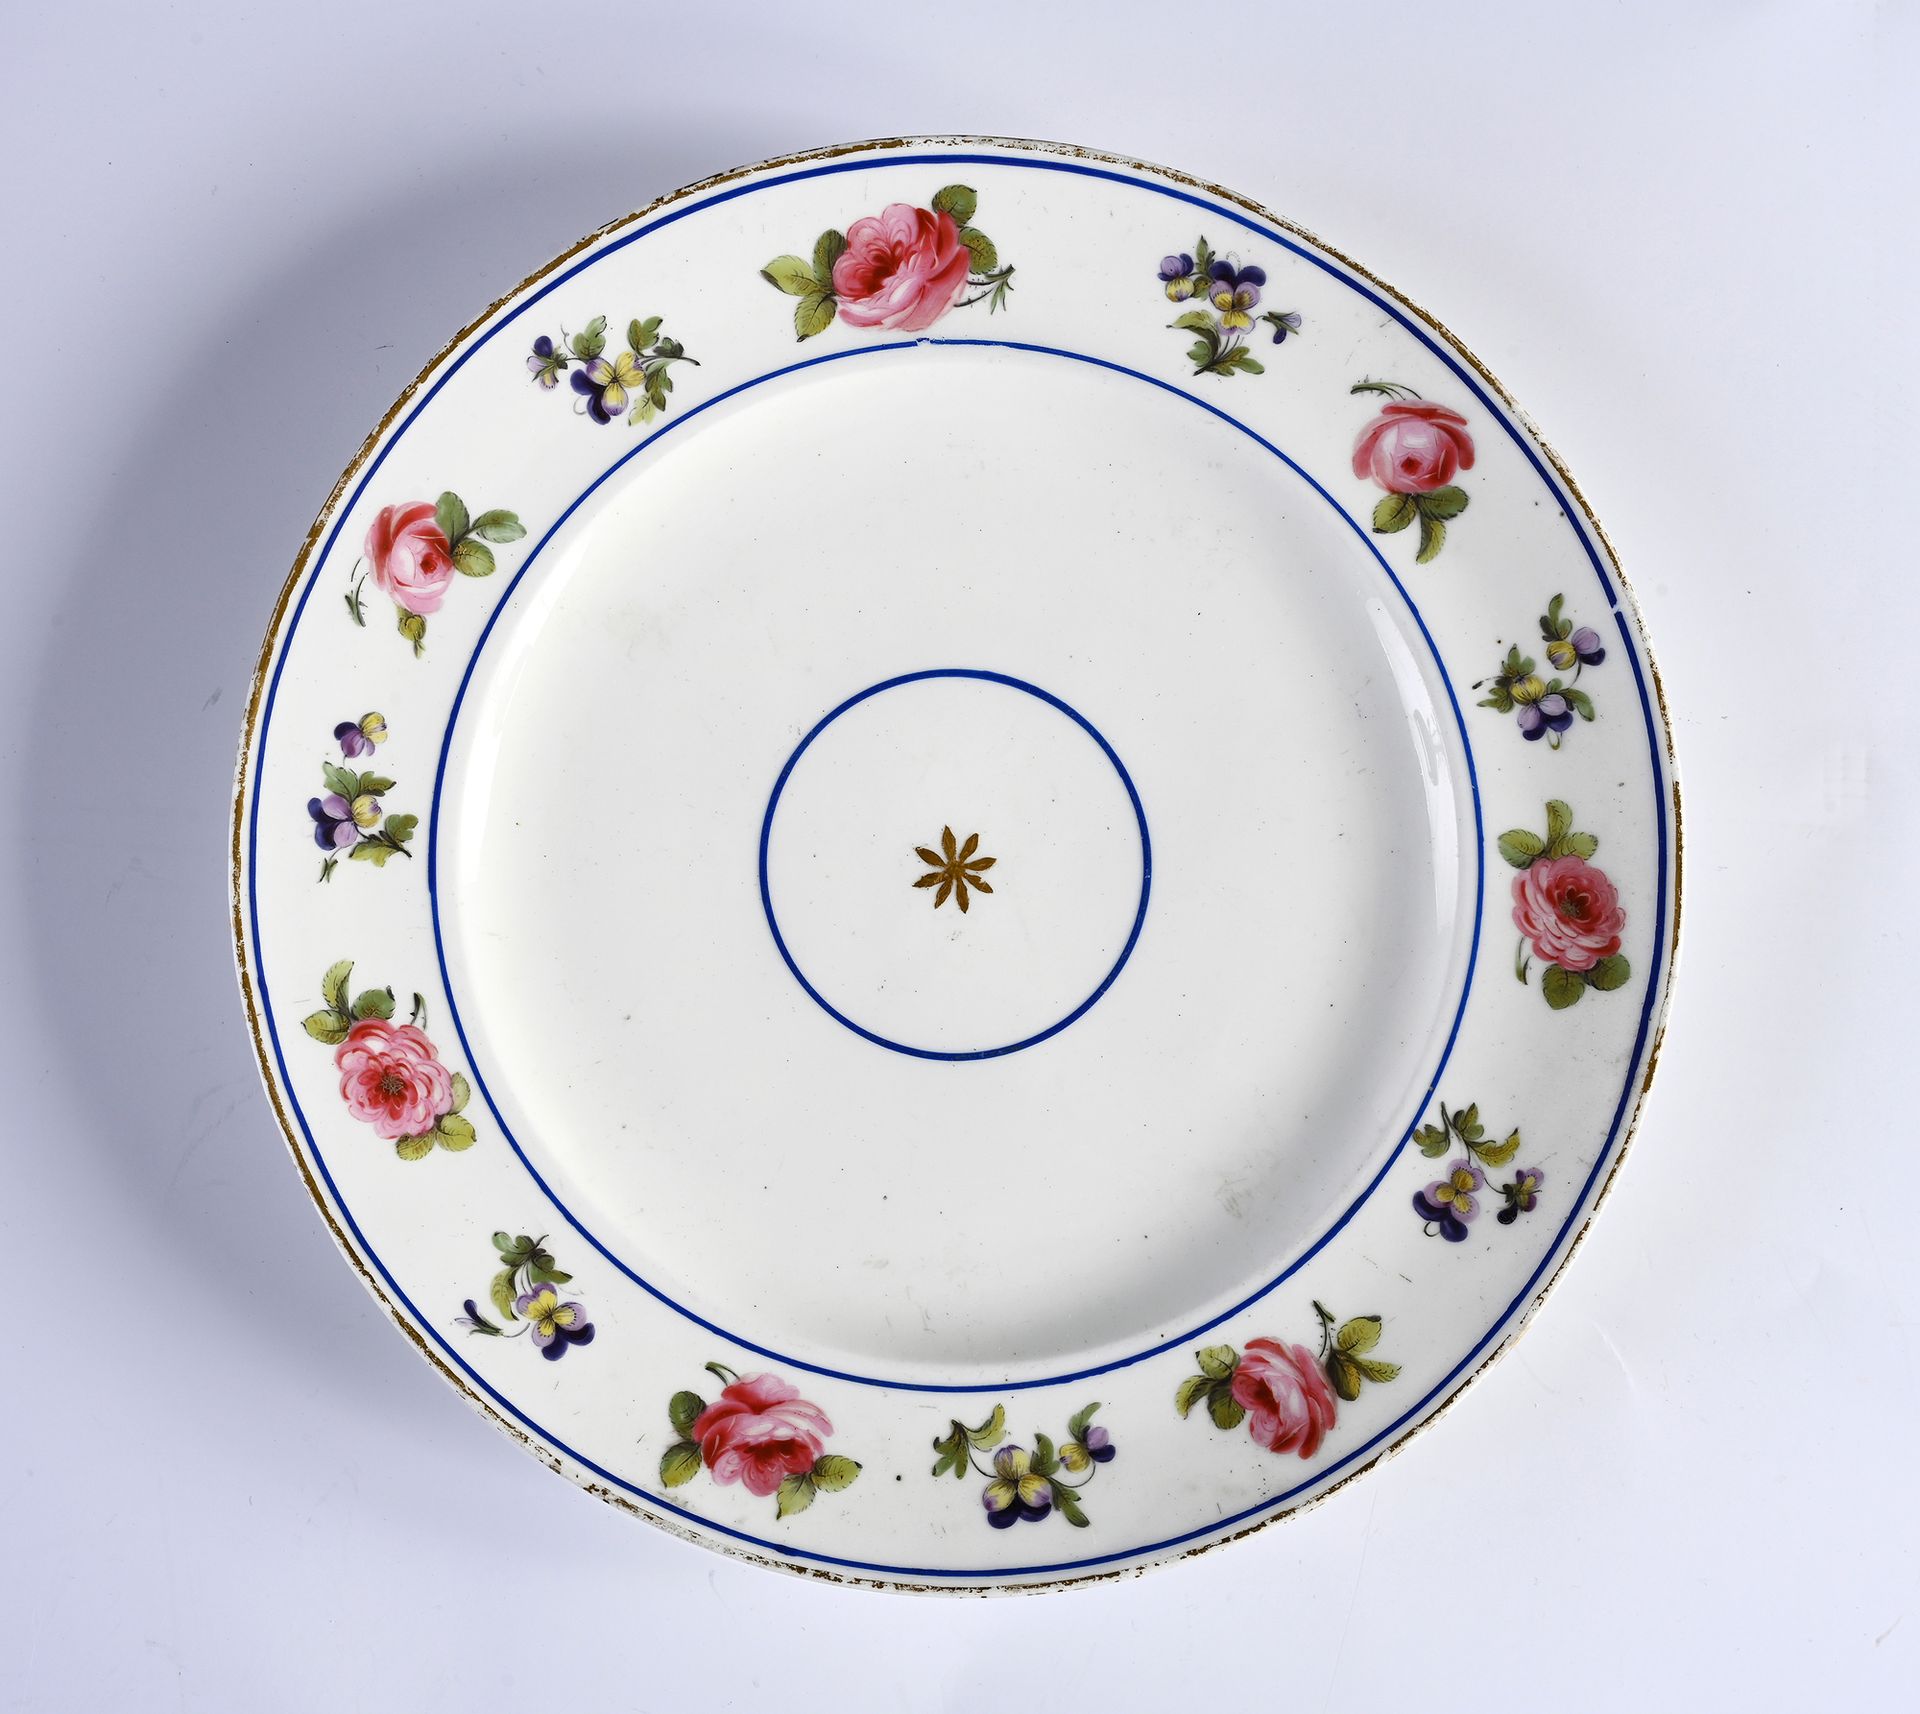 Null Plate in Sèvres porcelain from the end of the 18th century
Mark in blue Sèv&hellip;